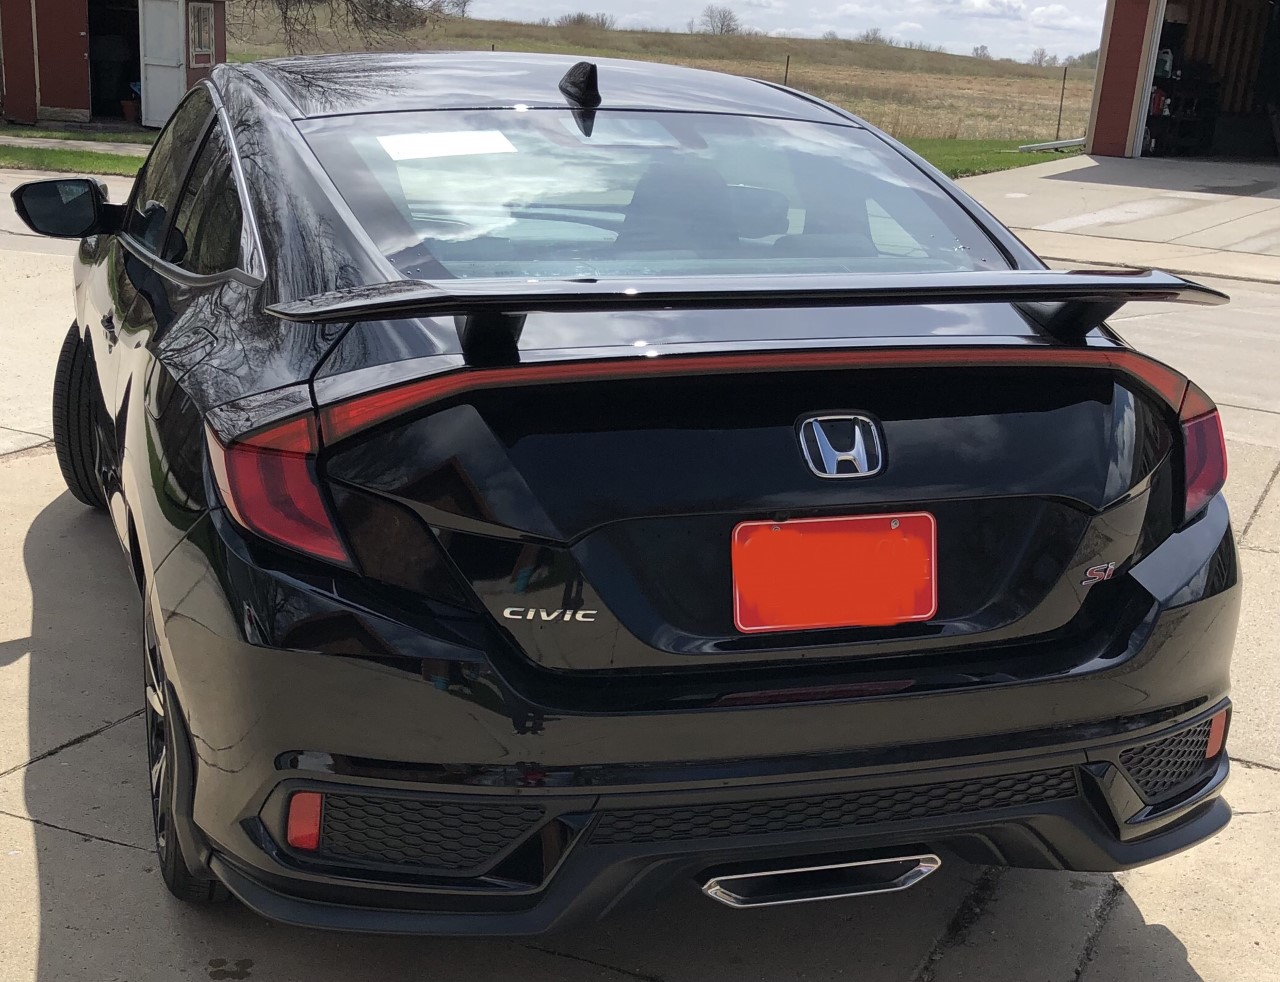 Honda Civic 10th gen I joined the party!  2019 Civic Si Coupe Car Pic 4